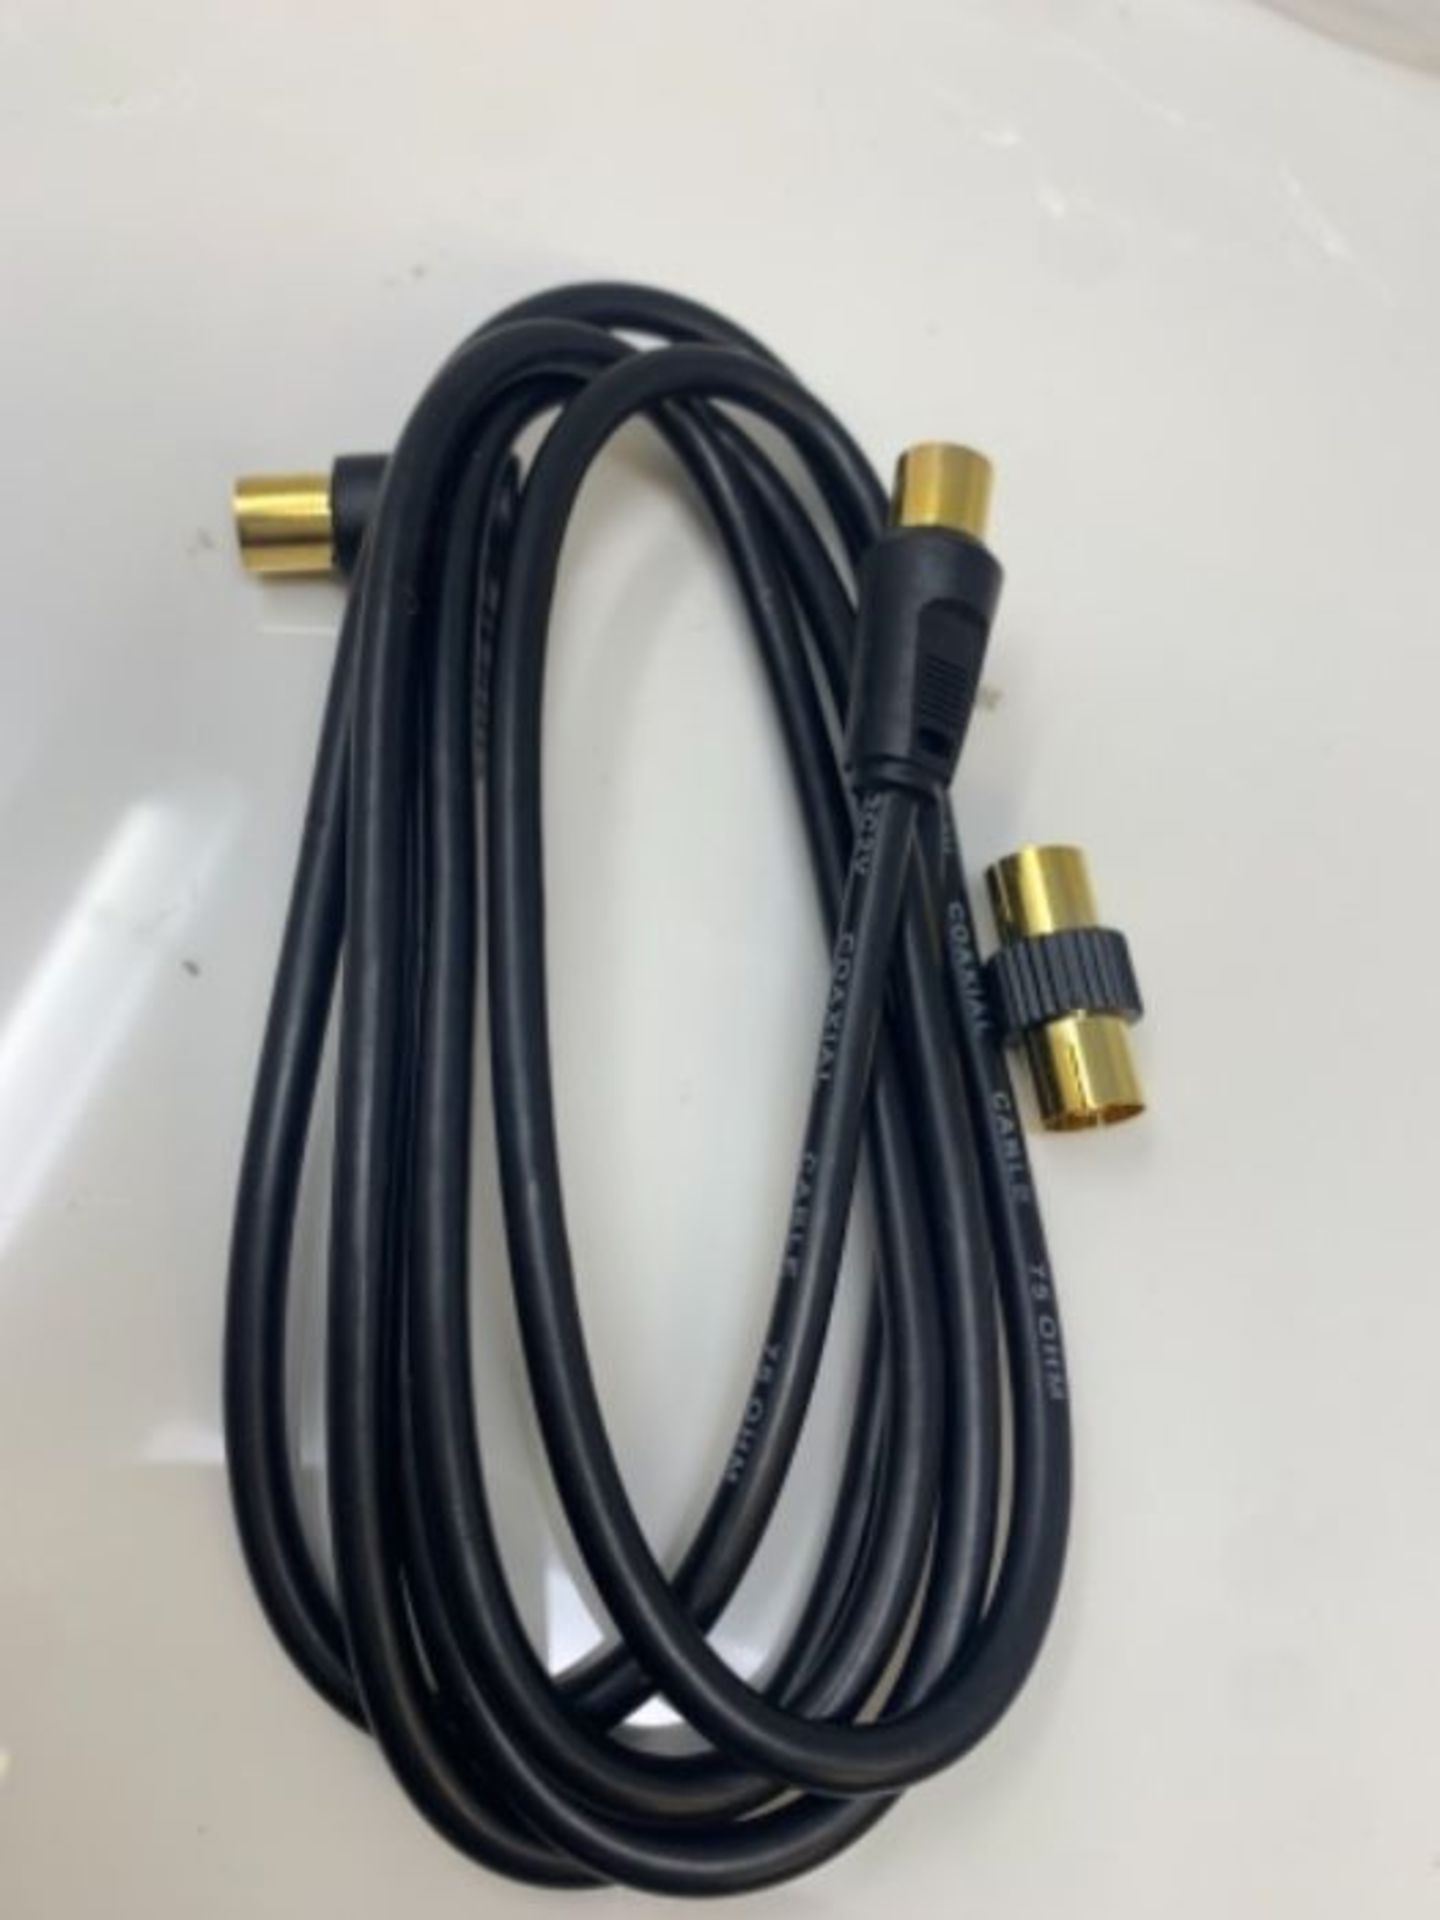 1.5m Long TV Aerial Right Angle with Plug Adapter - Coaxial Satellite Cable TV Antenna - Image 2 of 2